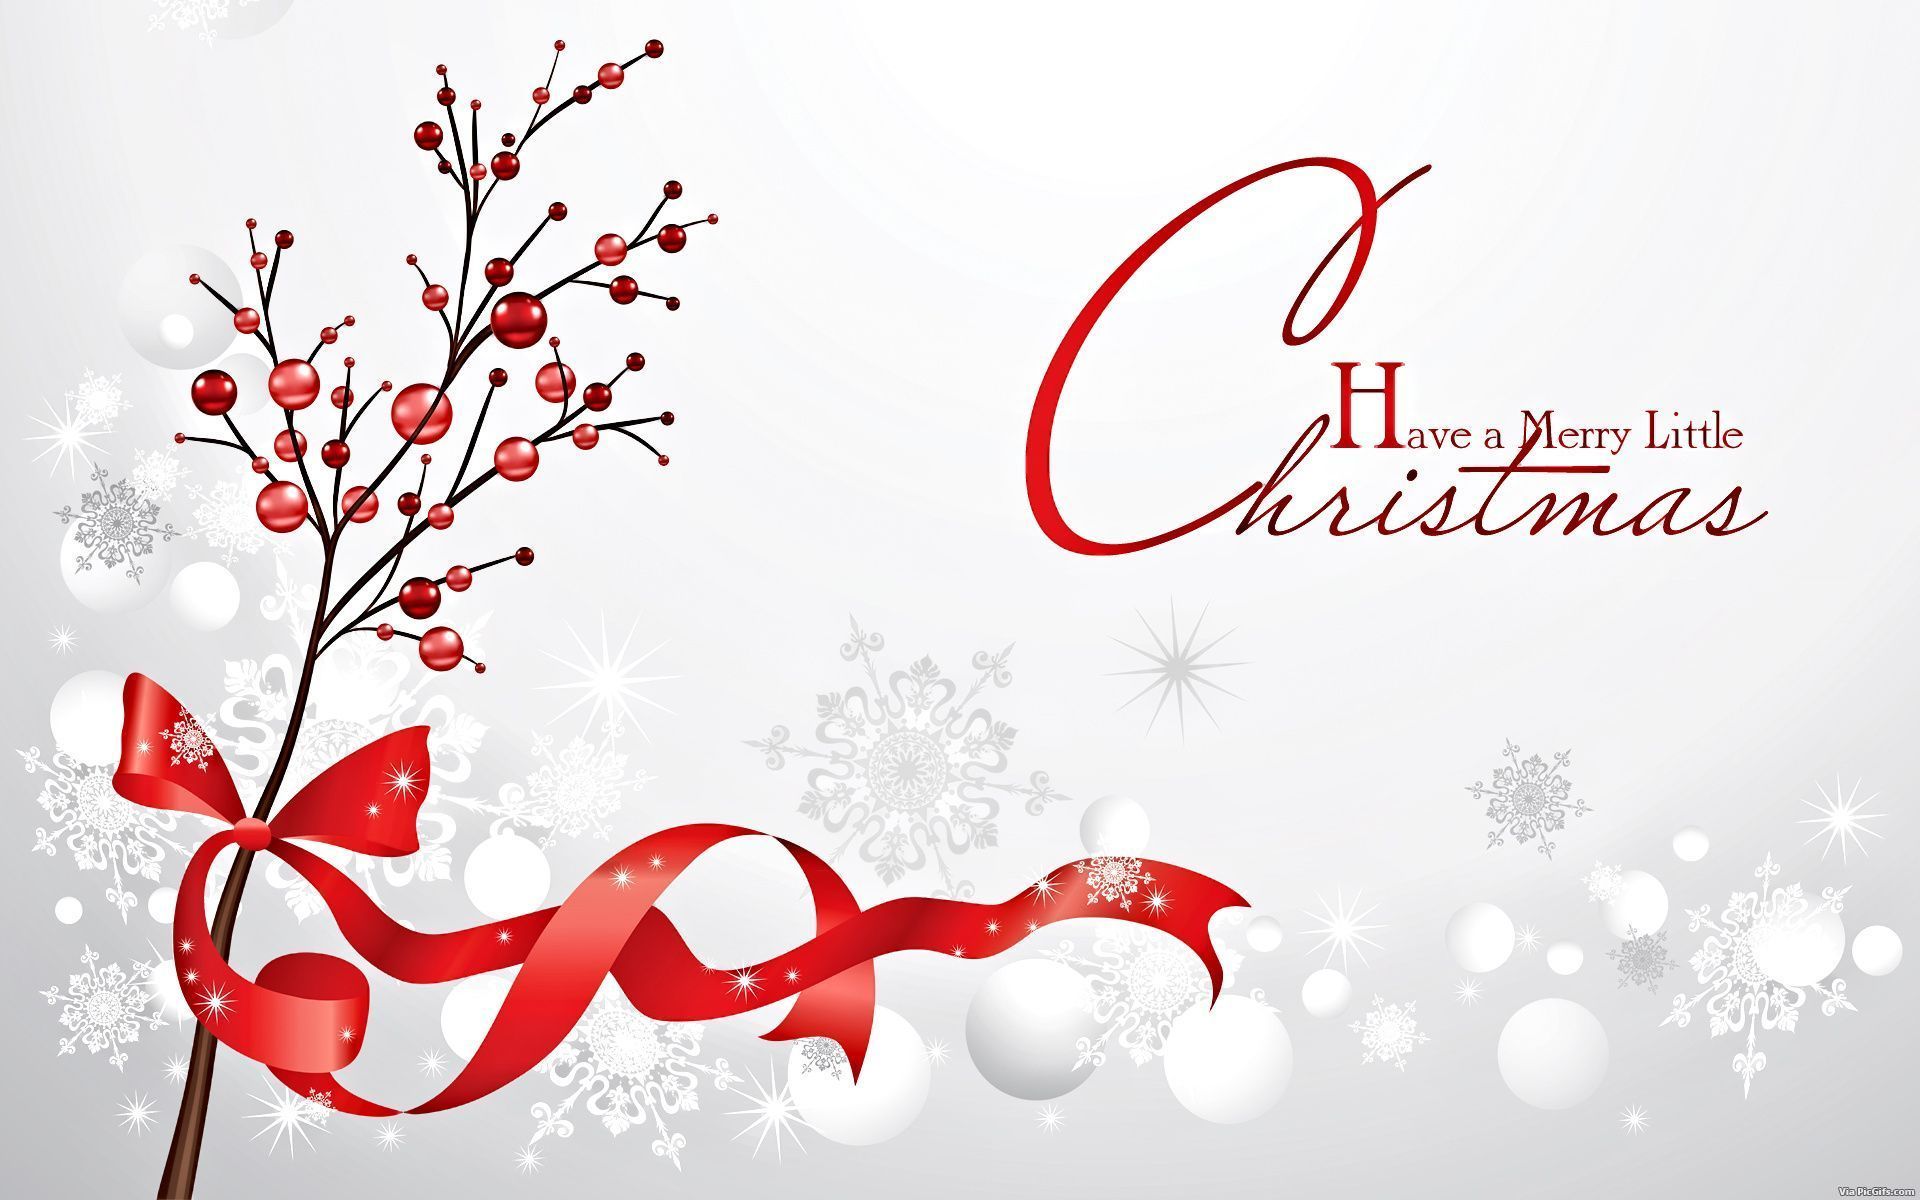 Merry christmas facebook graphics